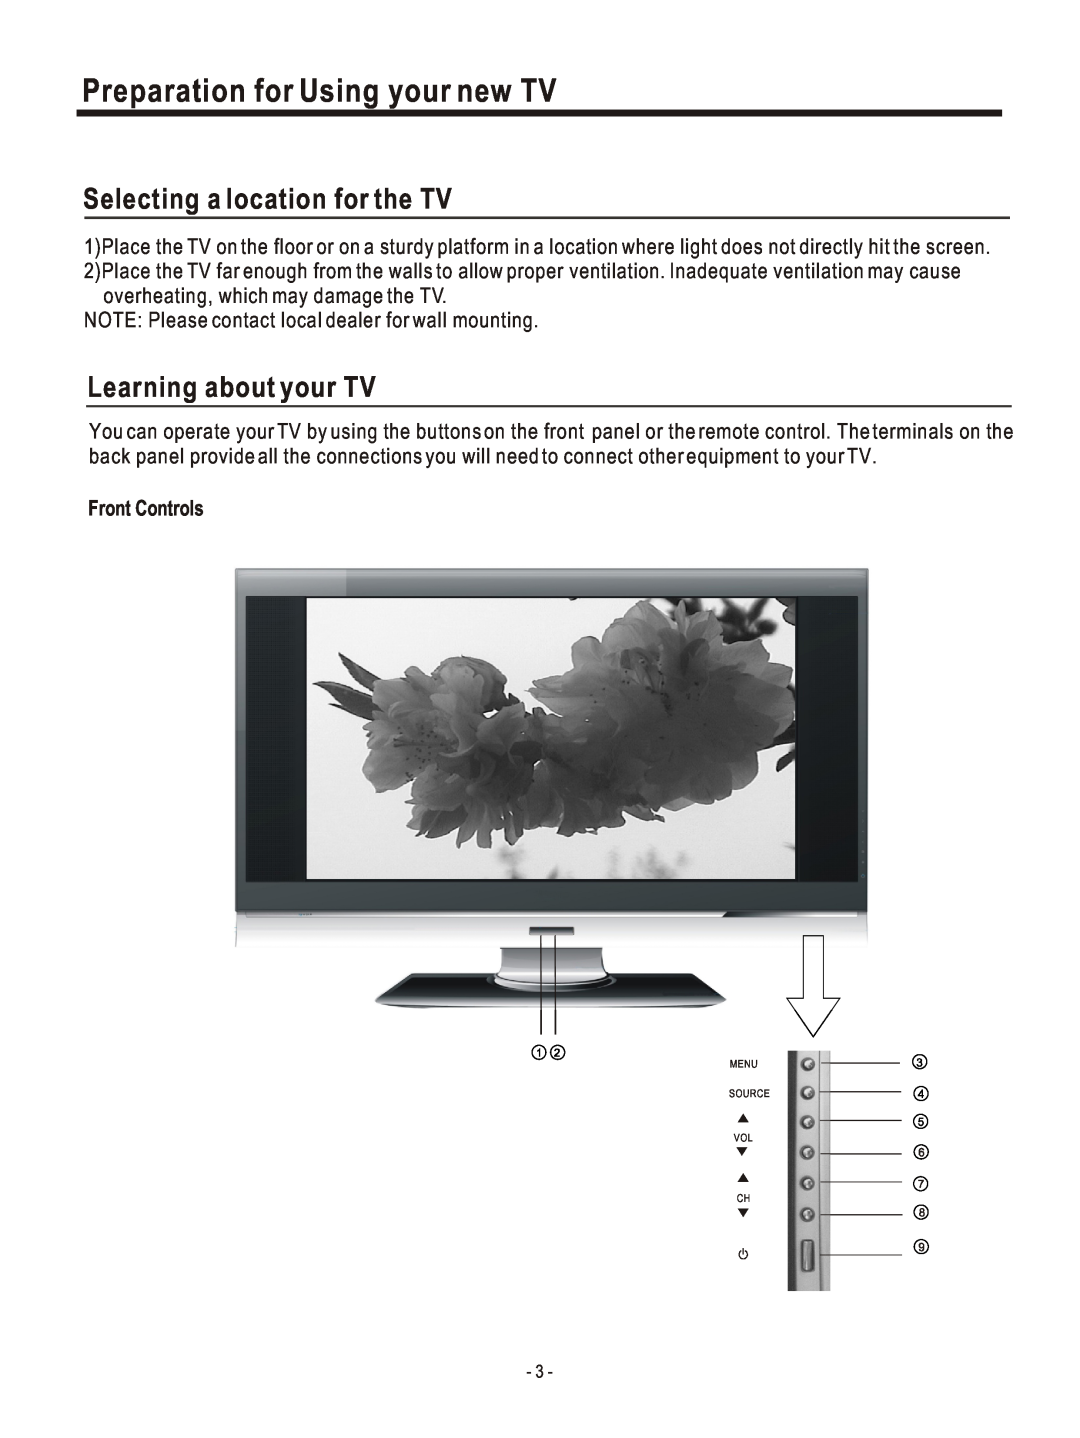 Hisense Group PDP4220EU Preparation for Using your new TV, Selecting a location for the TV, Learning about your TV 